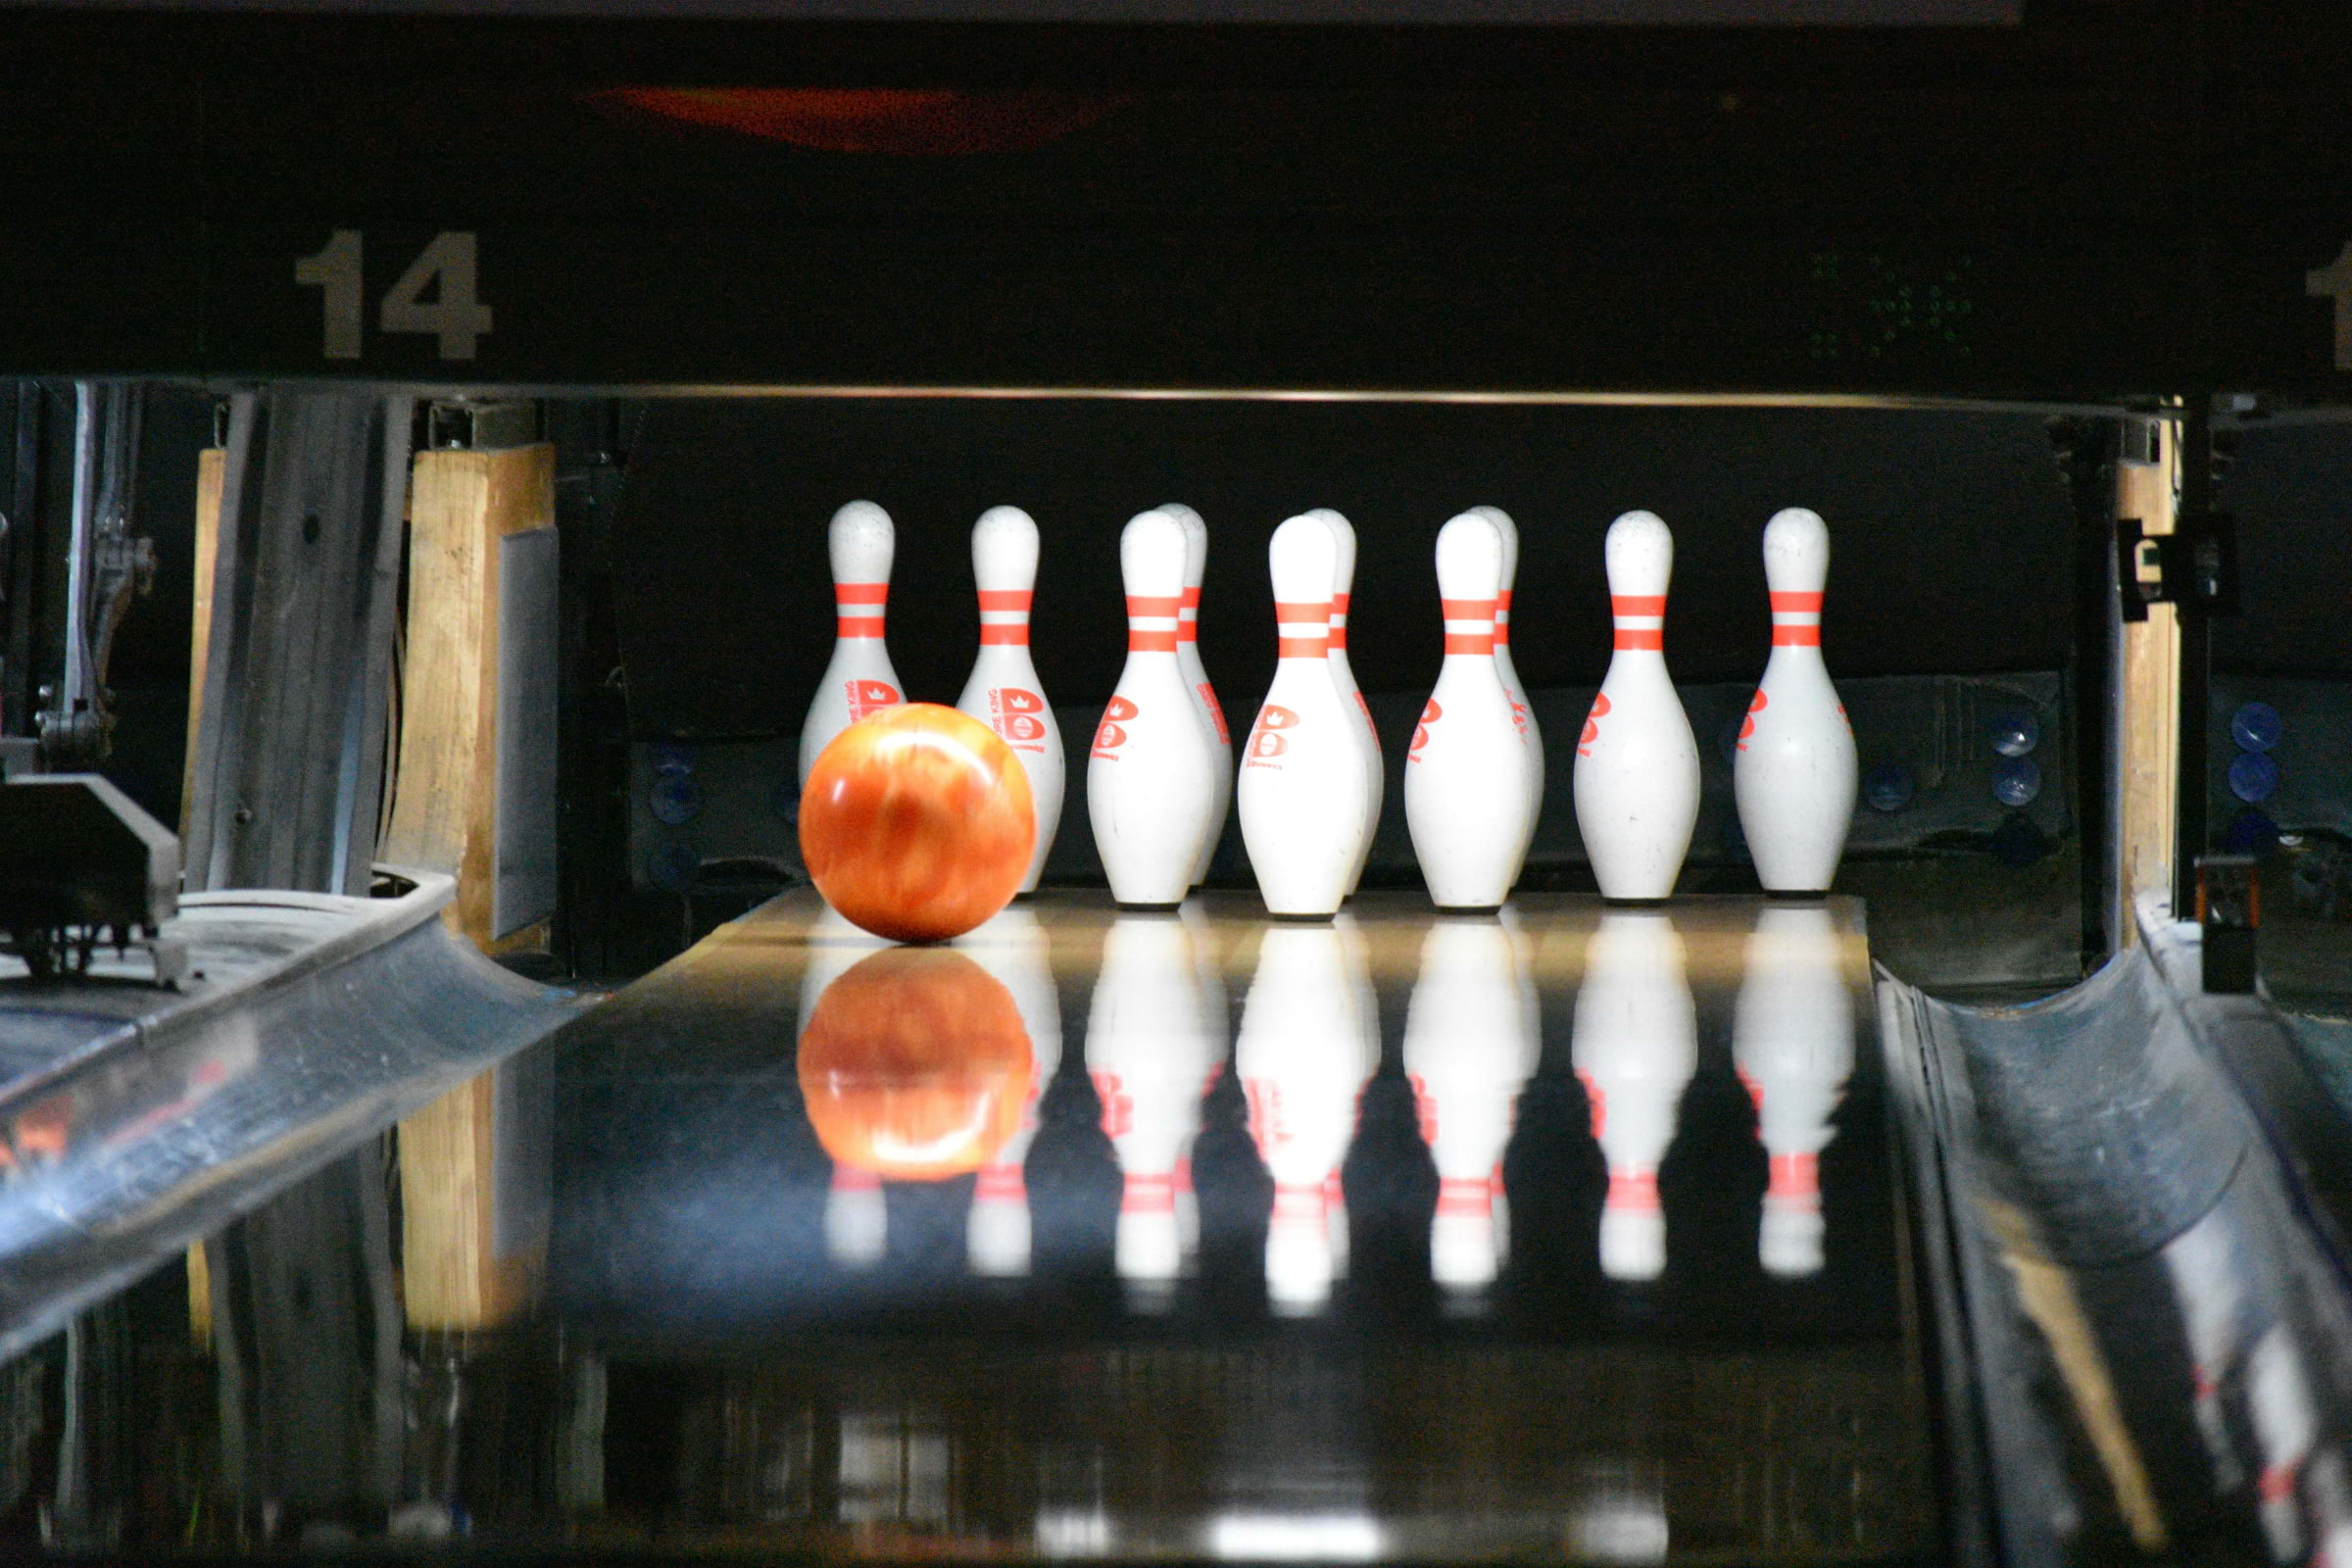 A bowling ball rolling towards pins on a bowling lane